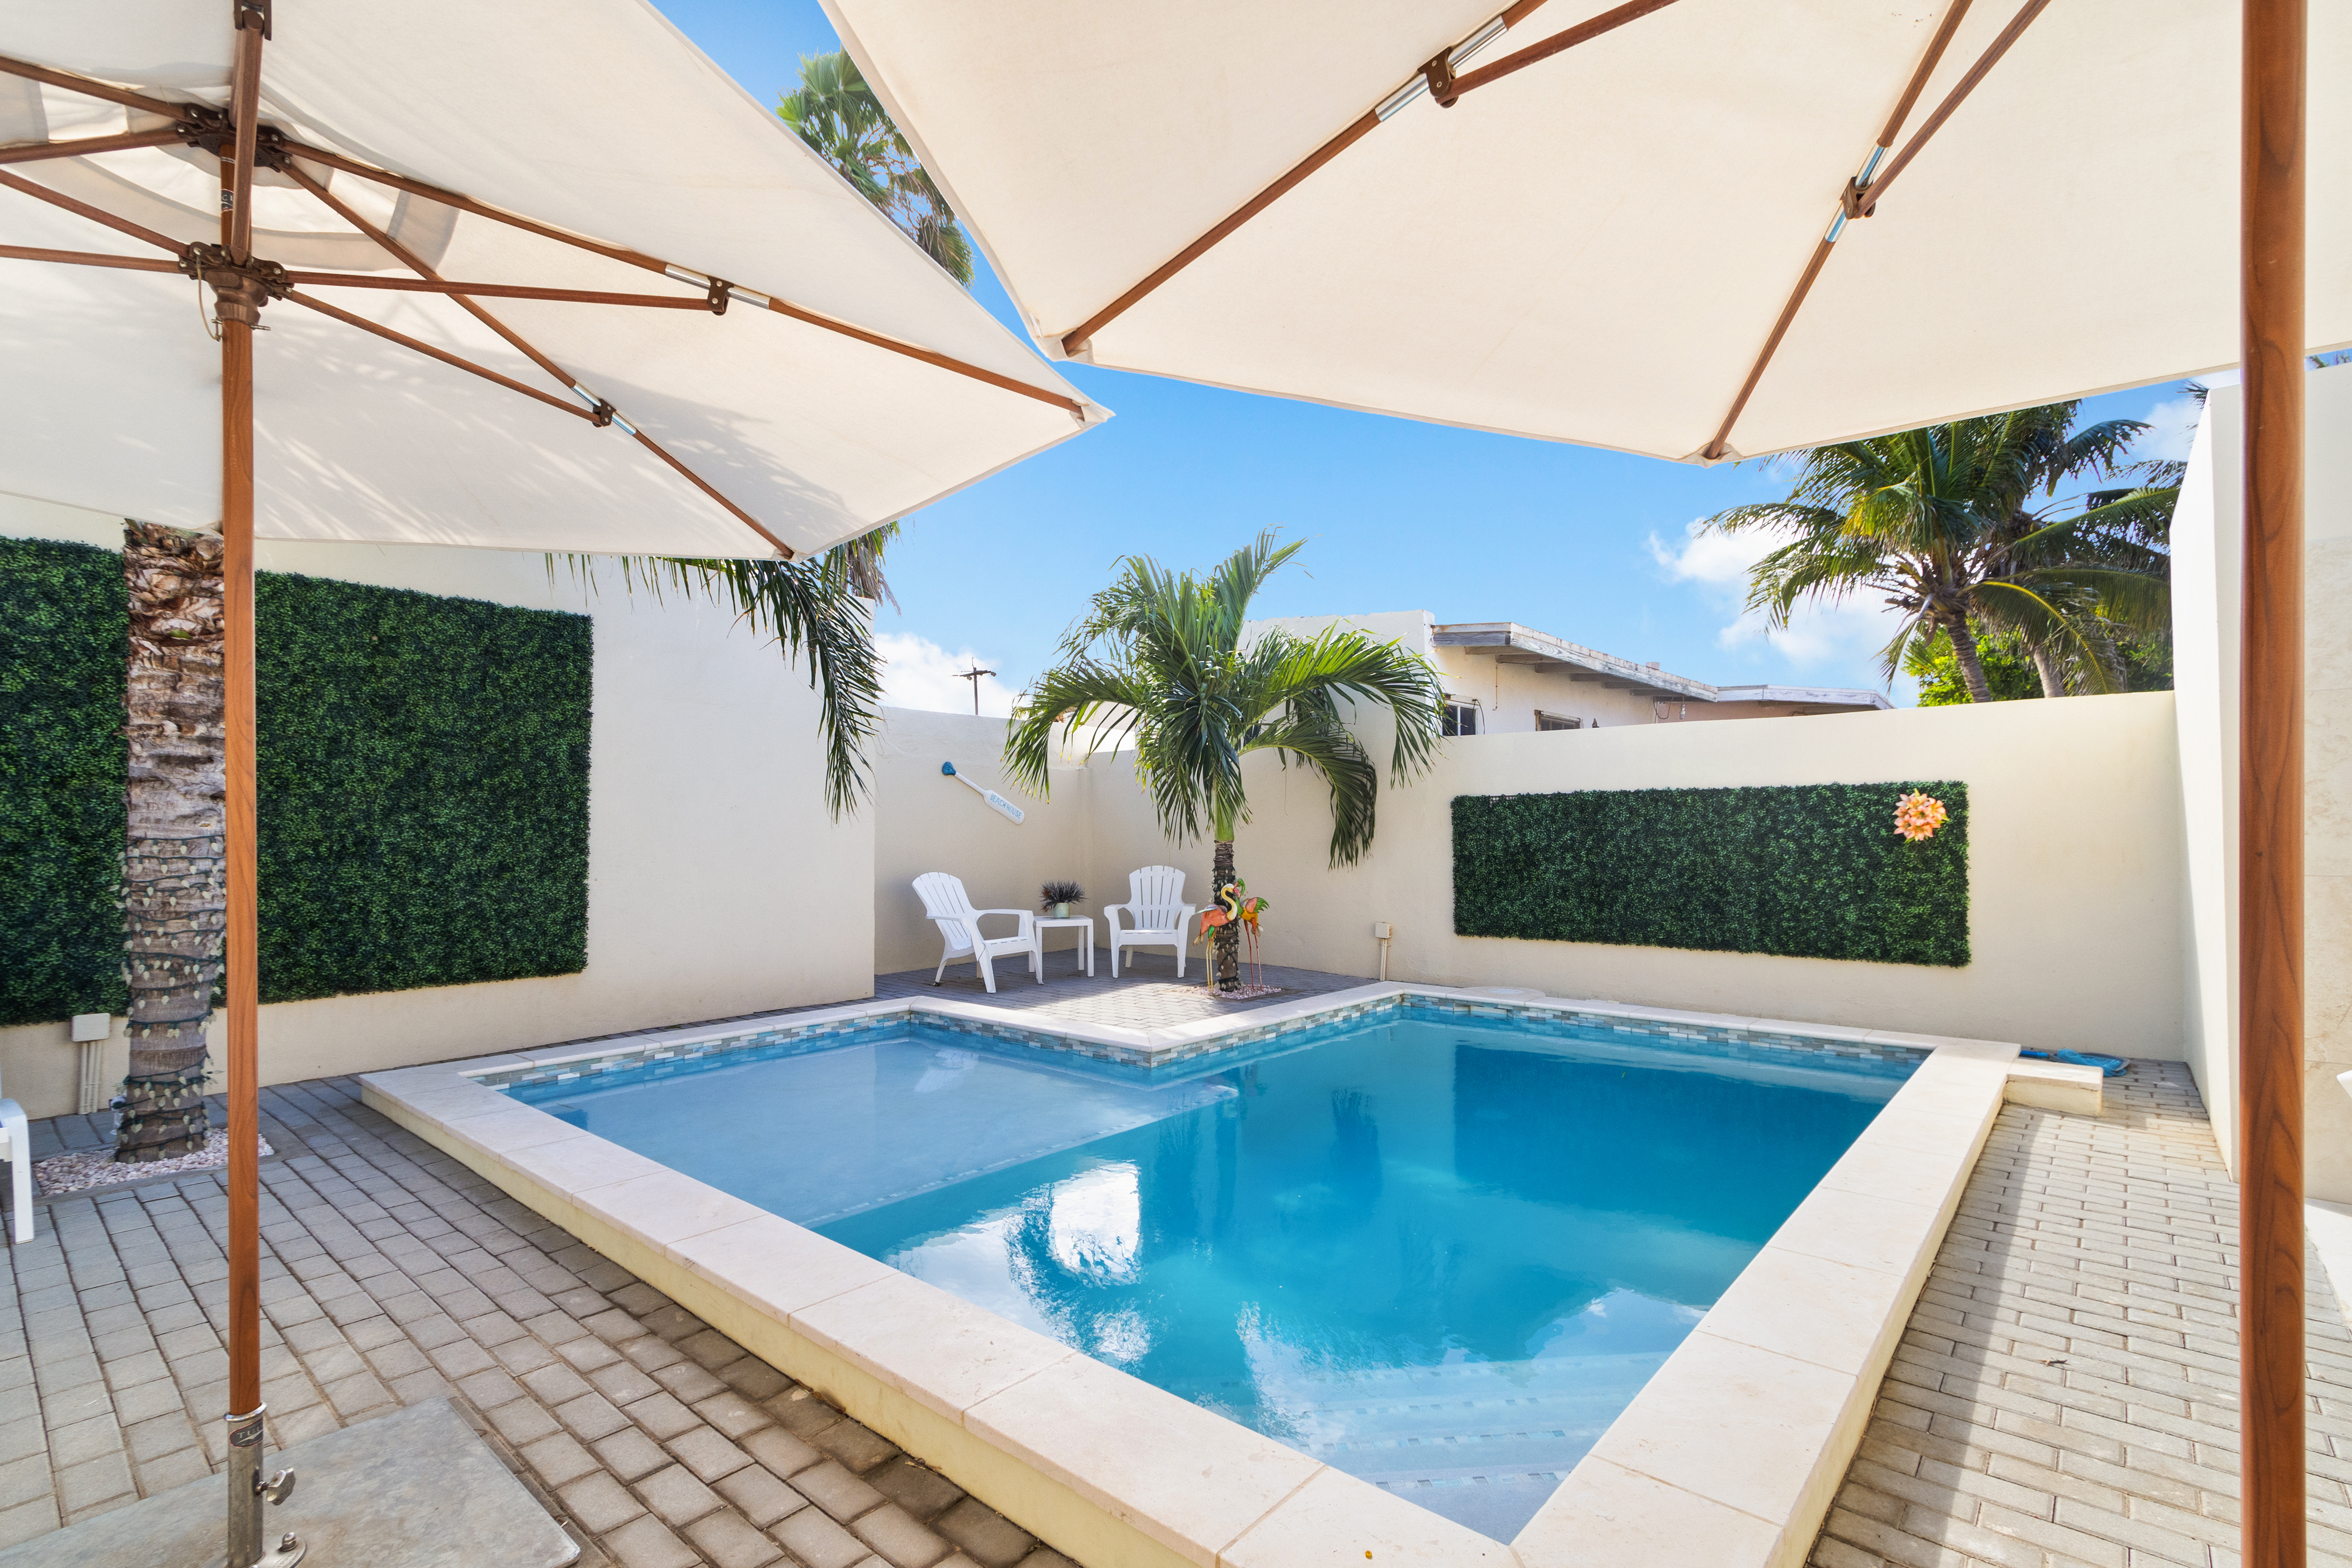 Refreshing Shared Pool of the Apartment in Noord, Aruba - Cosy beach chairs available - Dive into refreshing poolside escape - Immerse yourself in the cool elegance of our pool with umbrella shades - Experience ultimate relaxation in our poolside